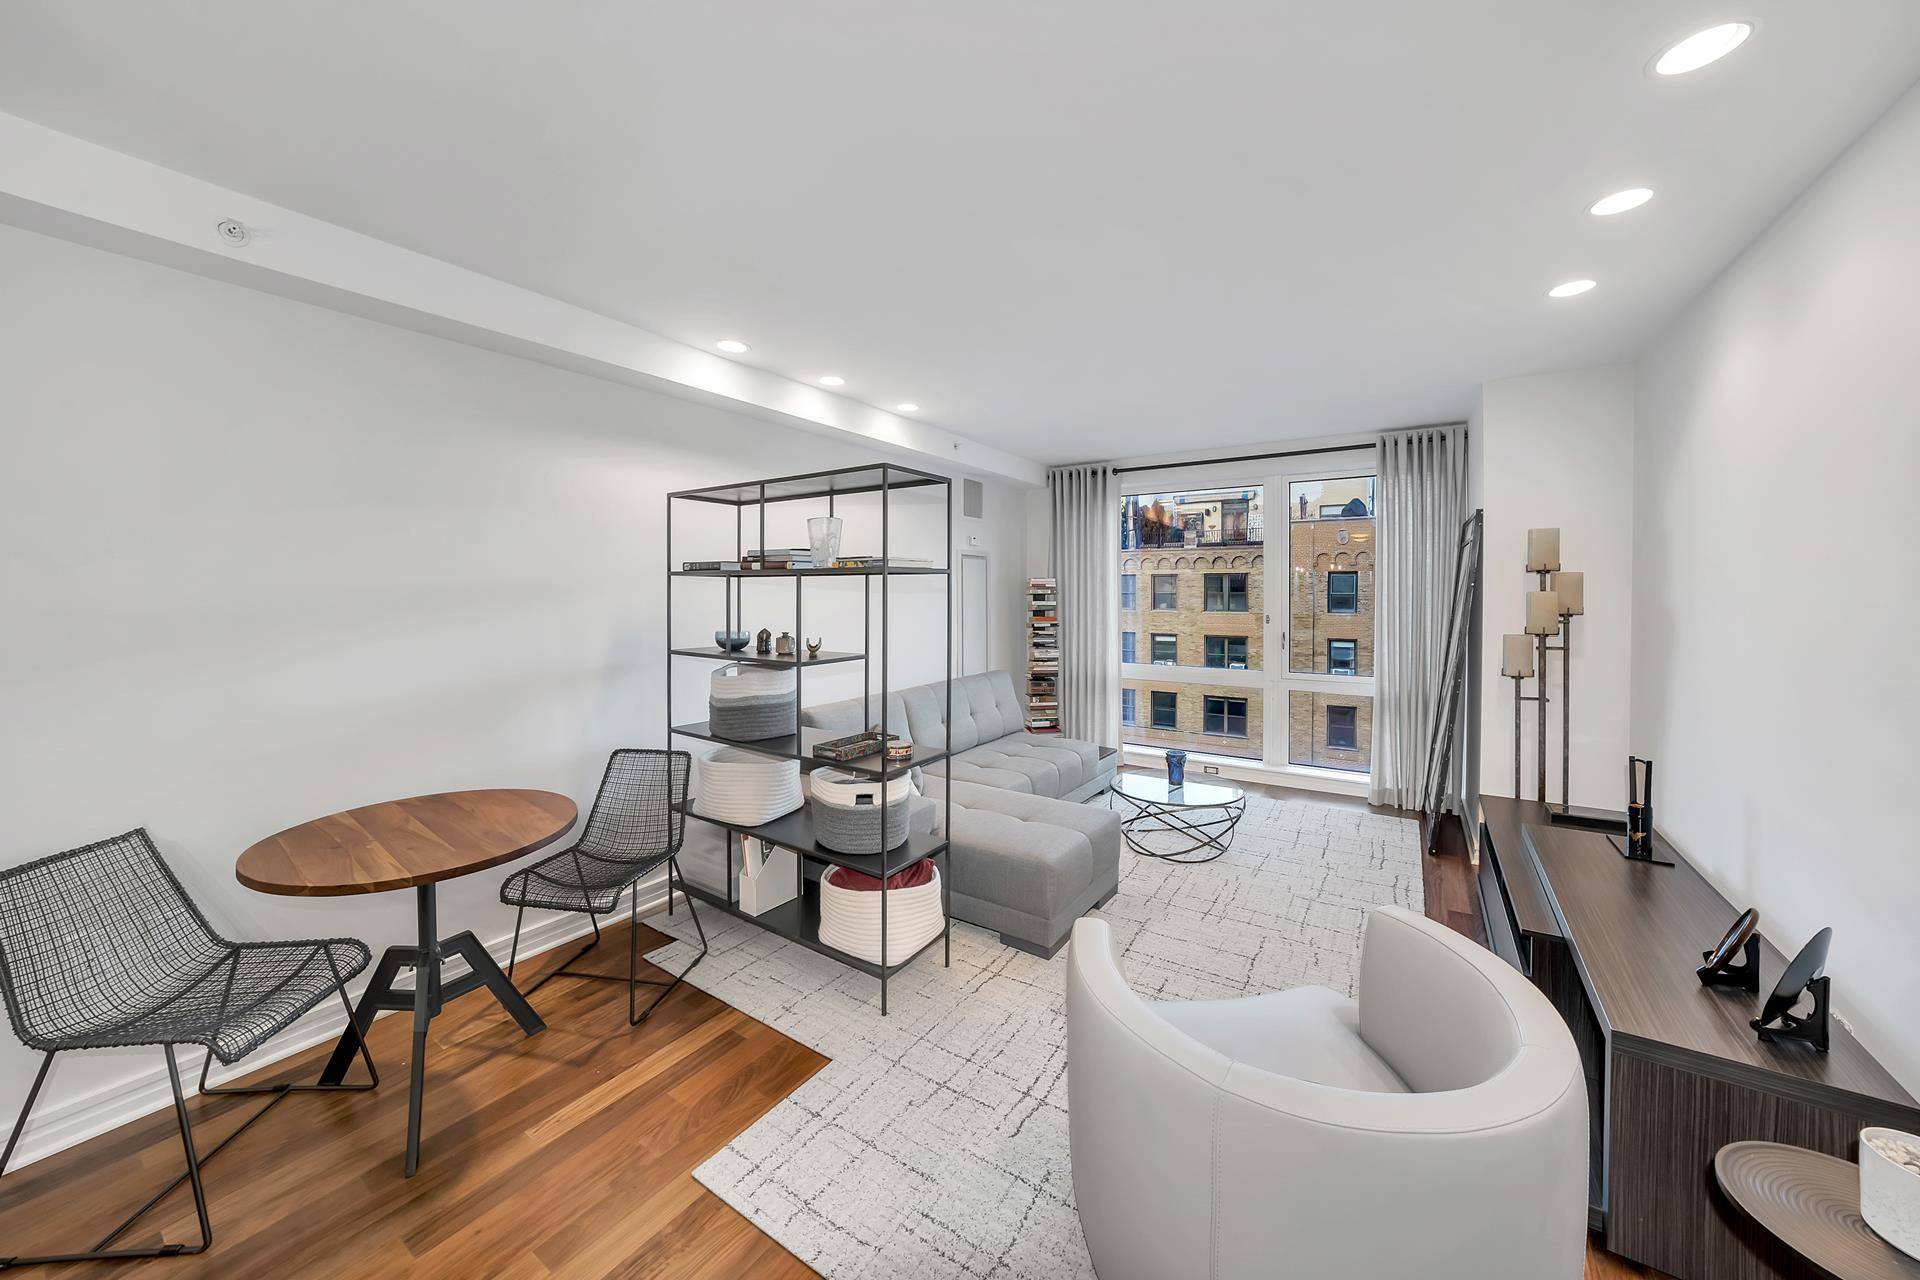 Stunning high floor one bedroom residence in Full Service Luxury Condominium in the Heart of the Upper West Side.